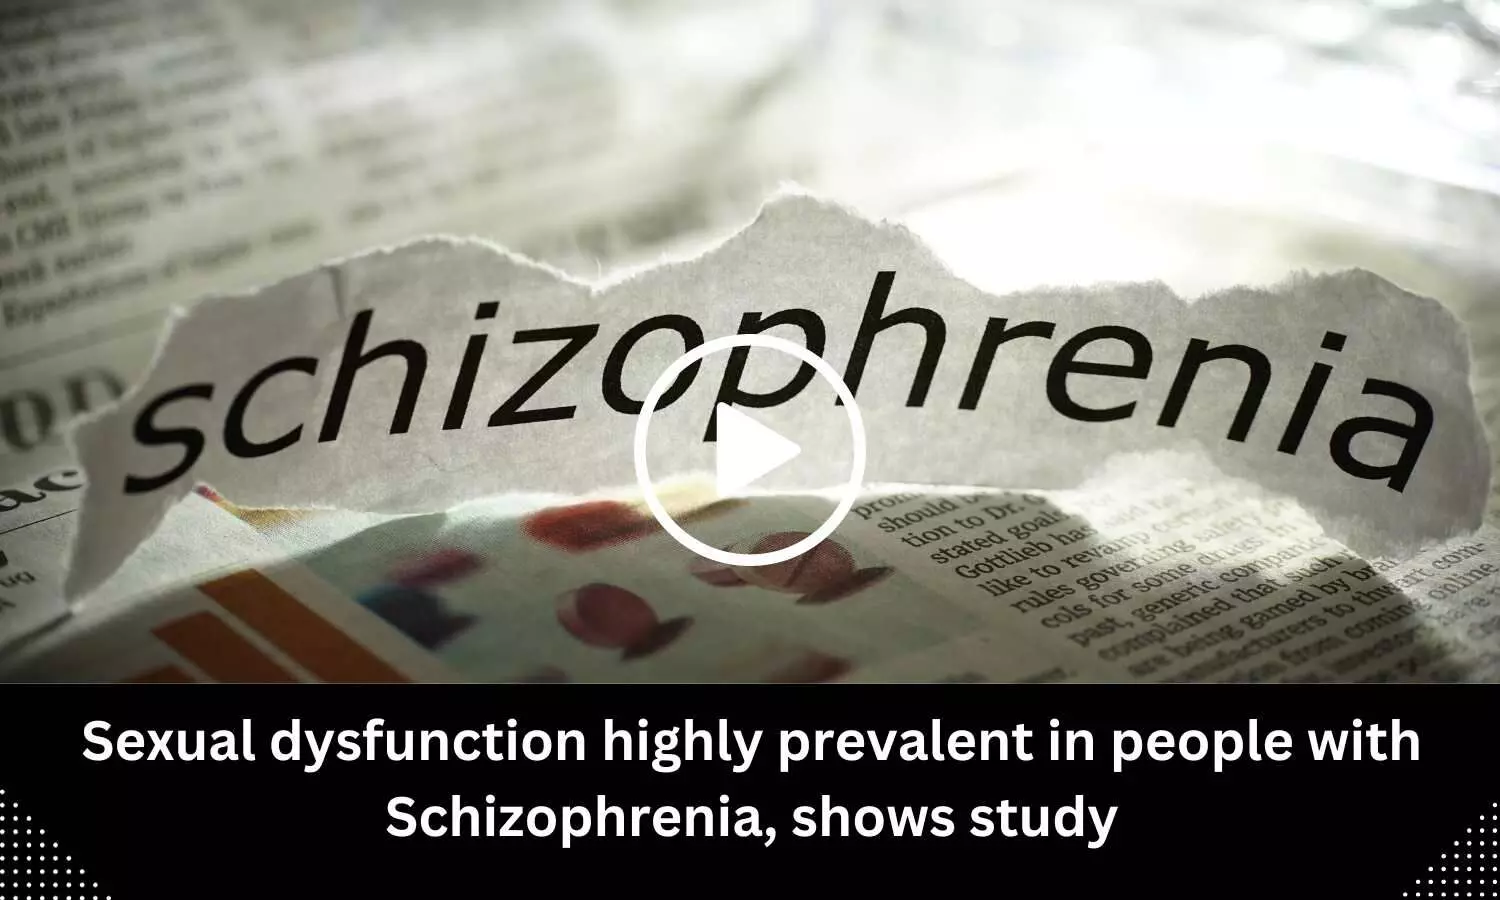 Sexual dysfunction highly prevalent in people with Schizophrenia, shows study